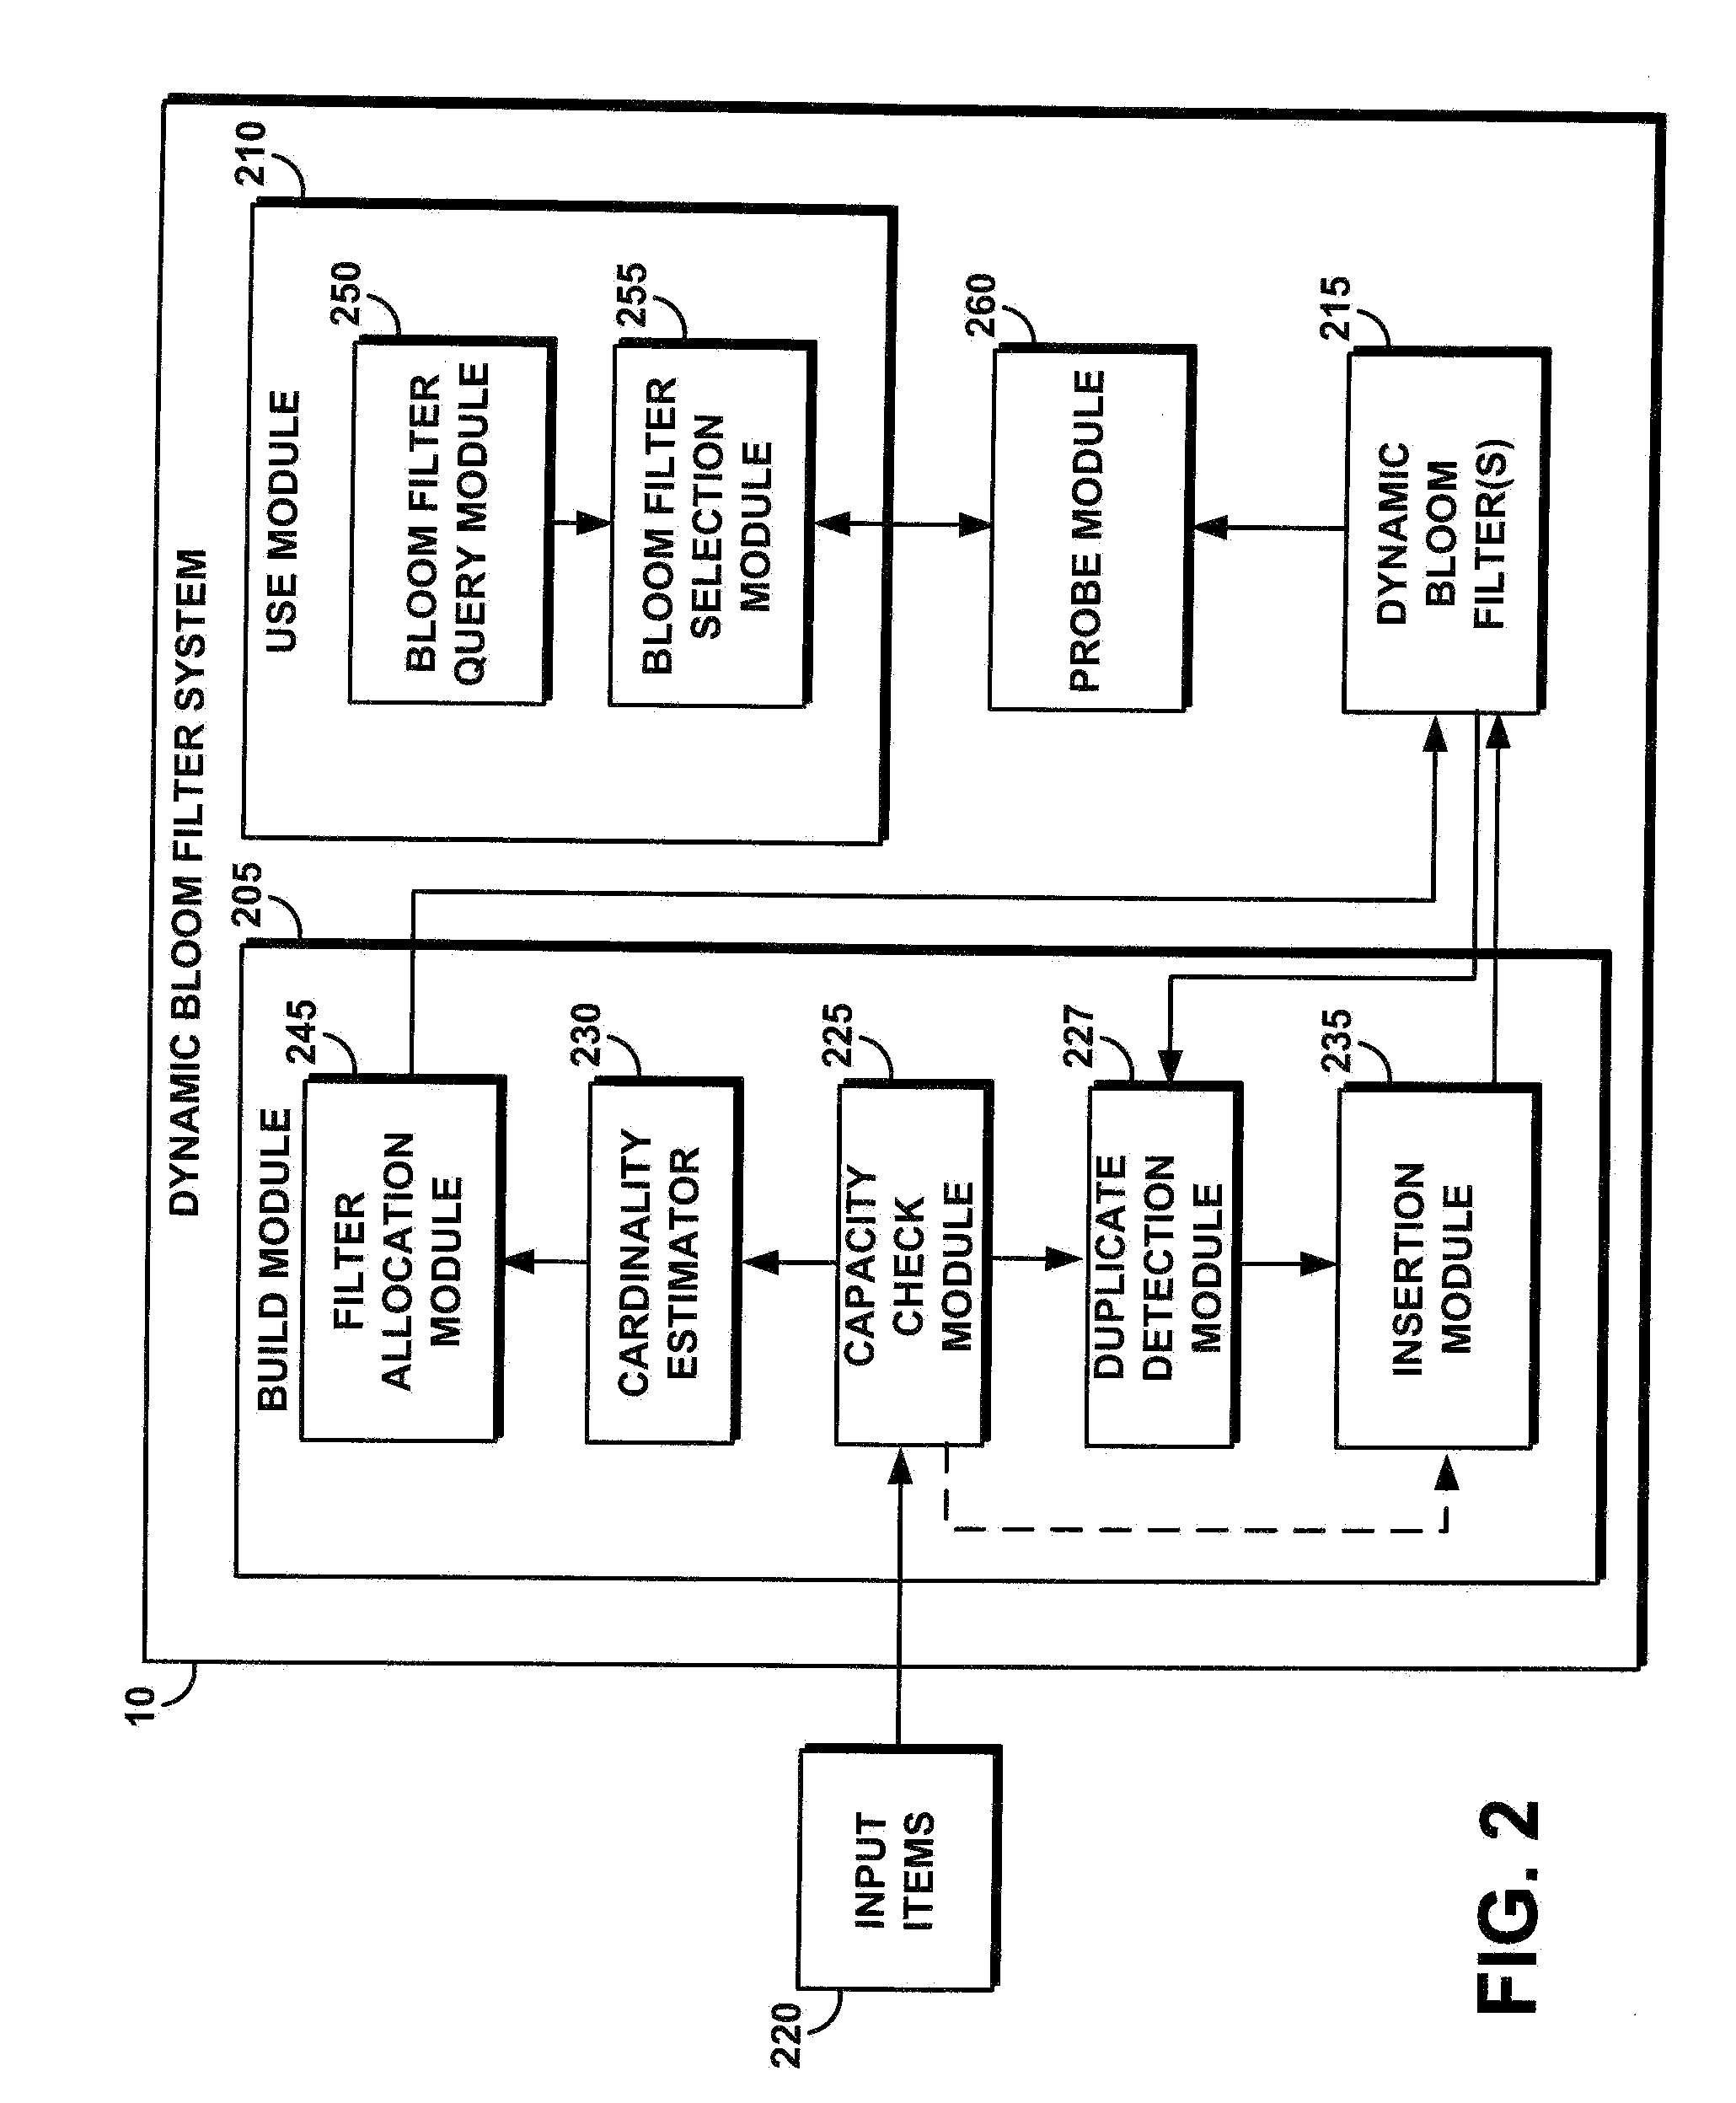 System and method for generating and using a dynamic  blood filter